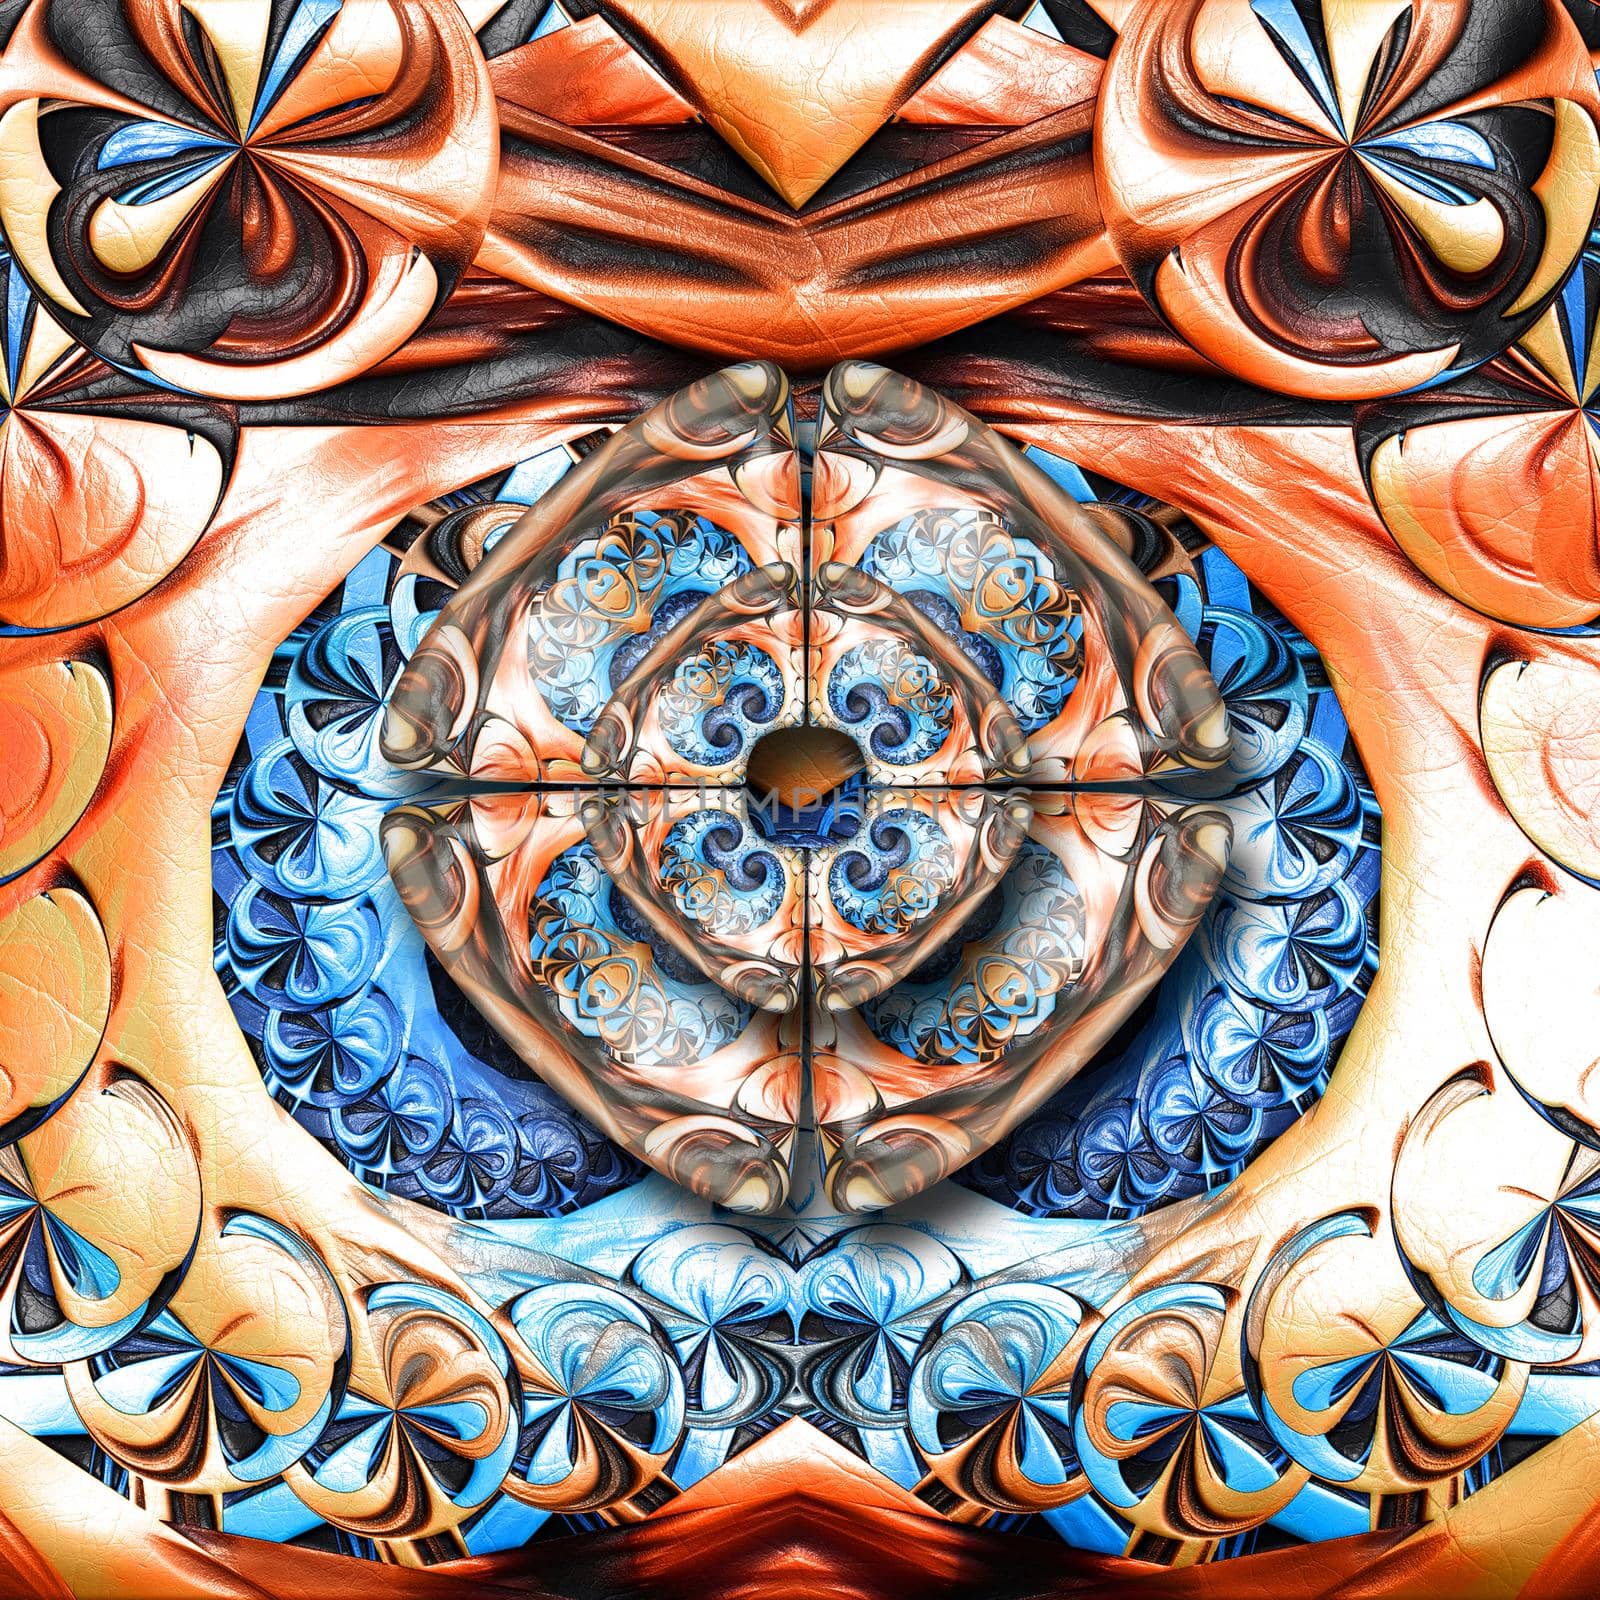 3D rendering combo creative graphics artwork with fractal on leather and fractal glossy buttons